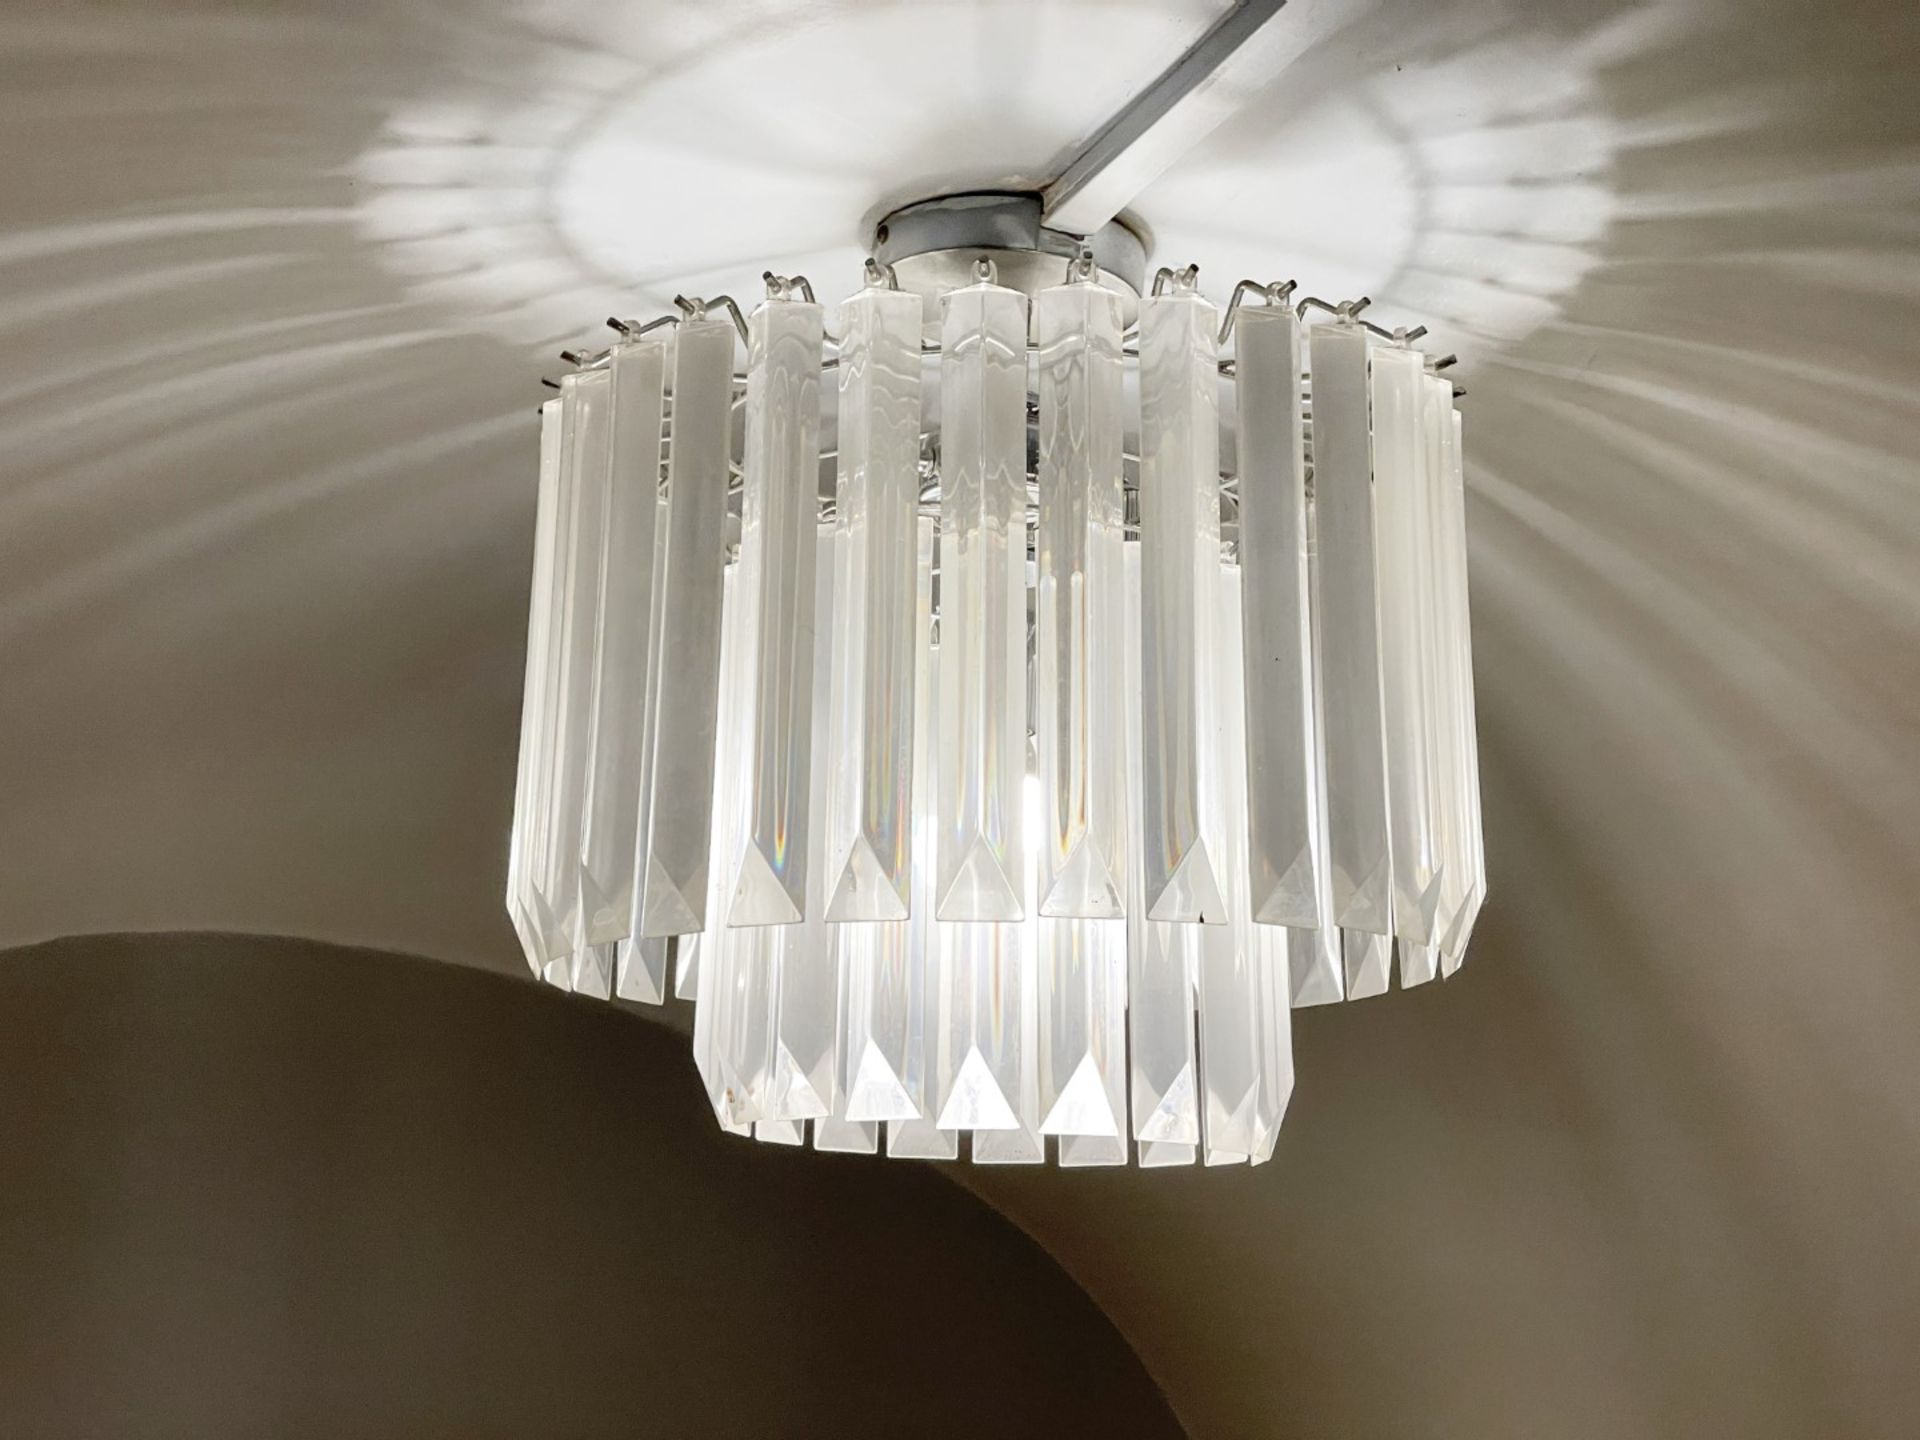 1 x Ceiling Pendant Chandelier Light Fitting Featuring 2-Tiers Of Long Droplets - Image 3 of 3